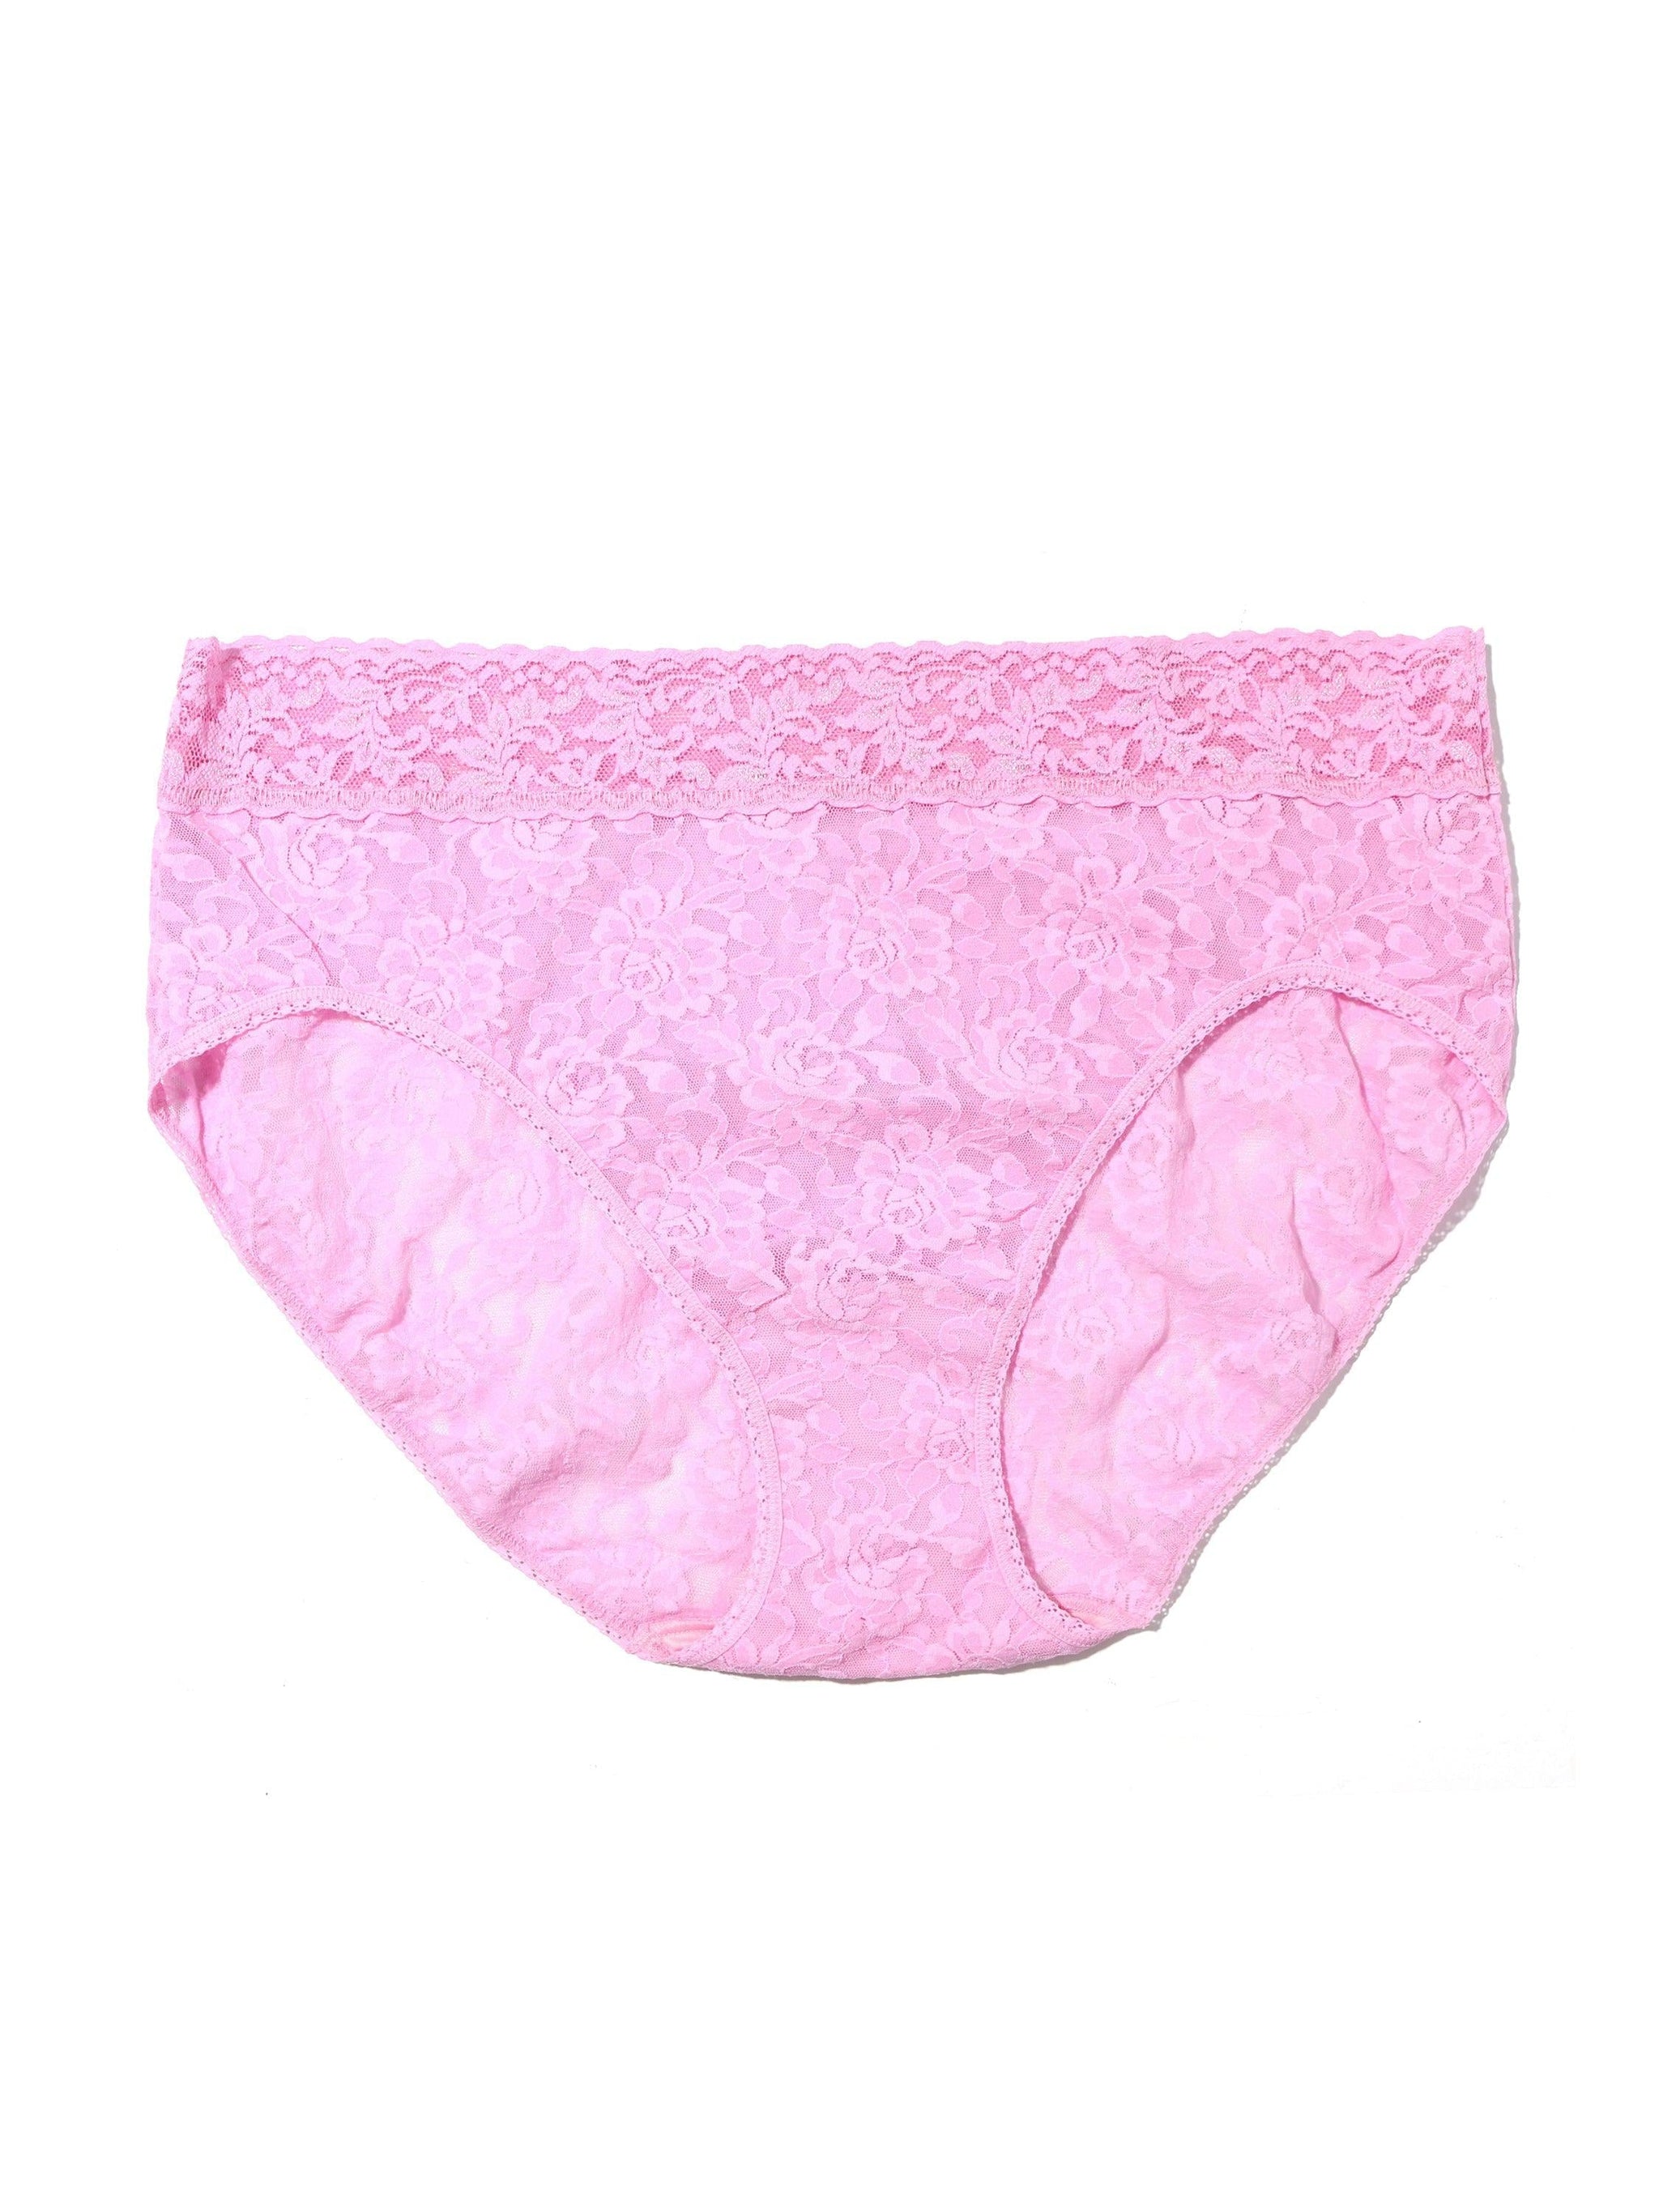 Plus Size Signature Lace French Brief Cotton Candy Pink Sale